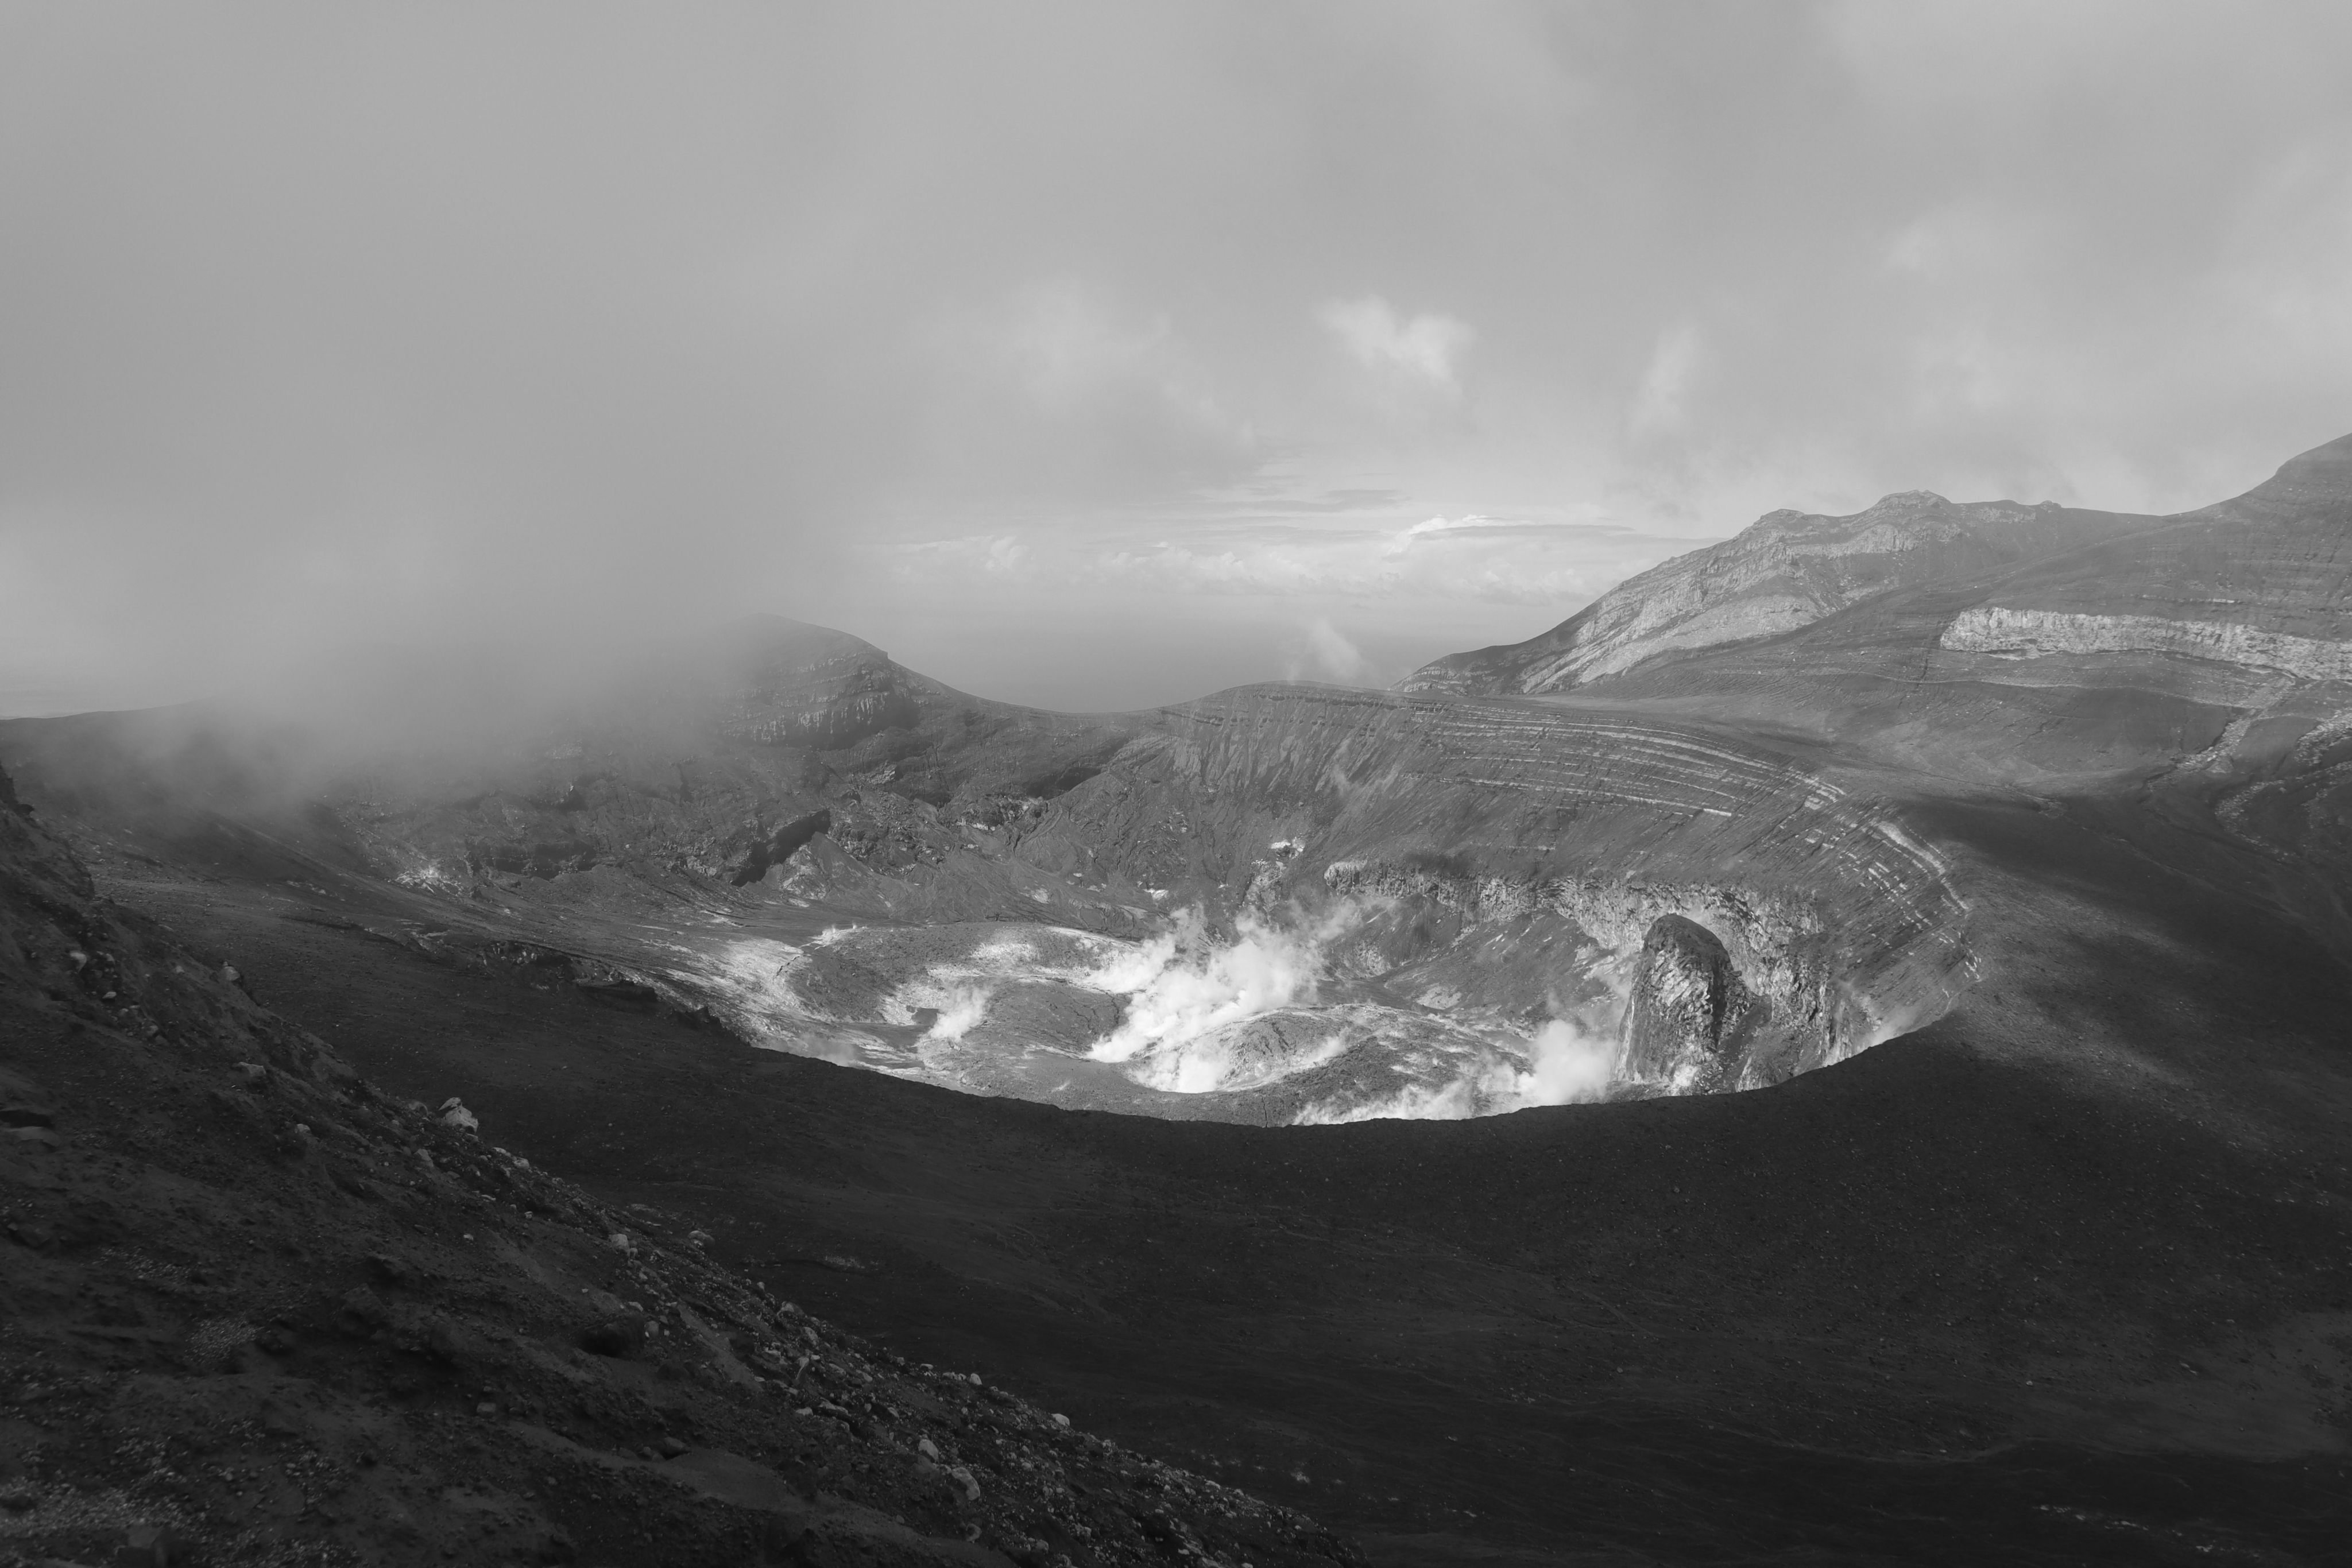 View into volcano crater, with clouds